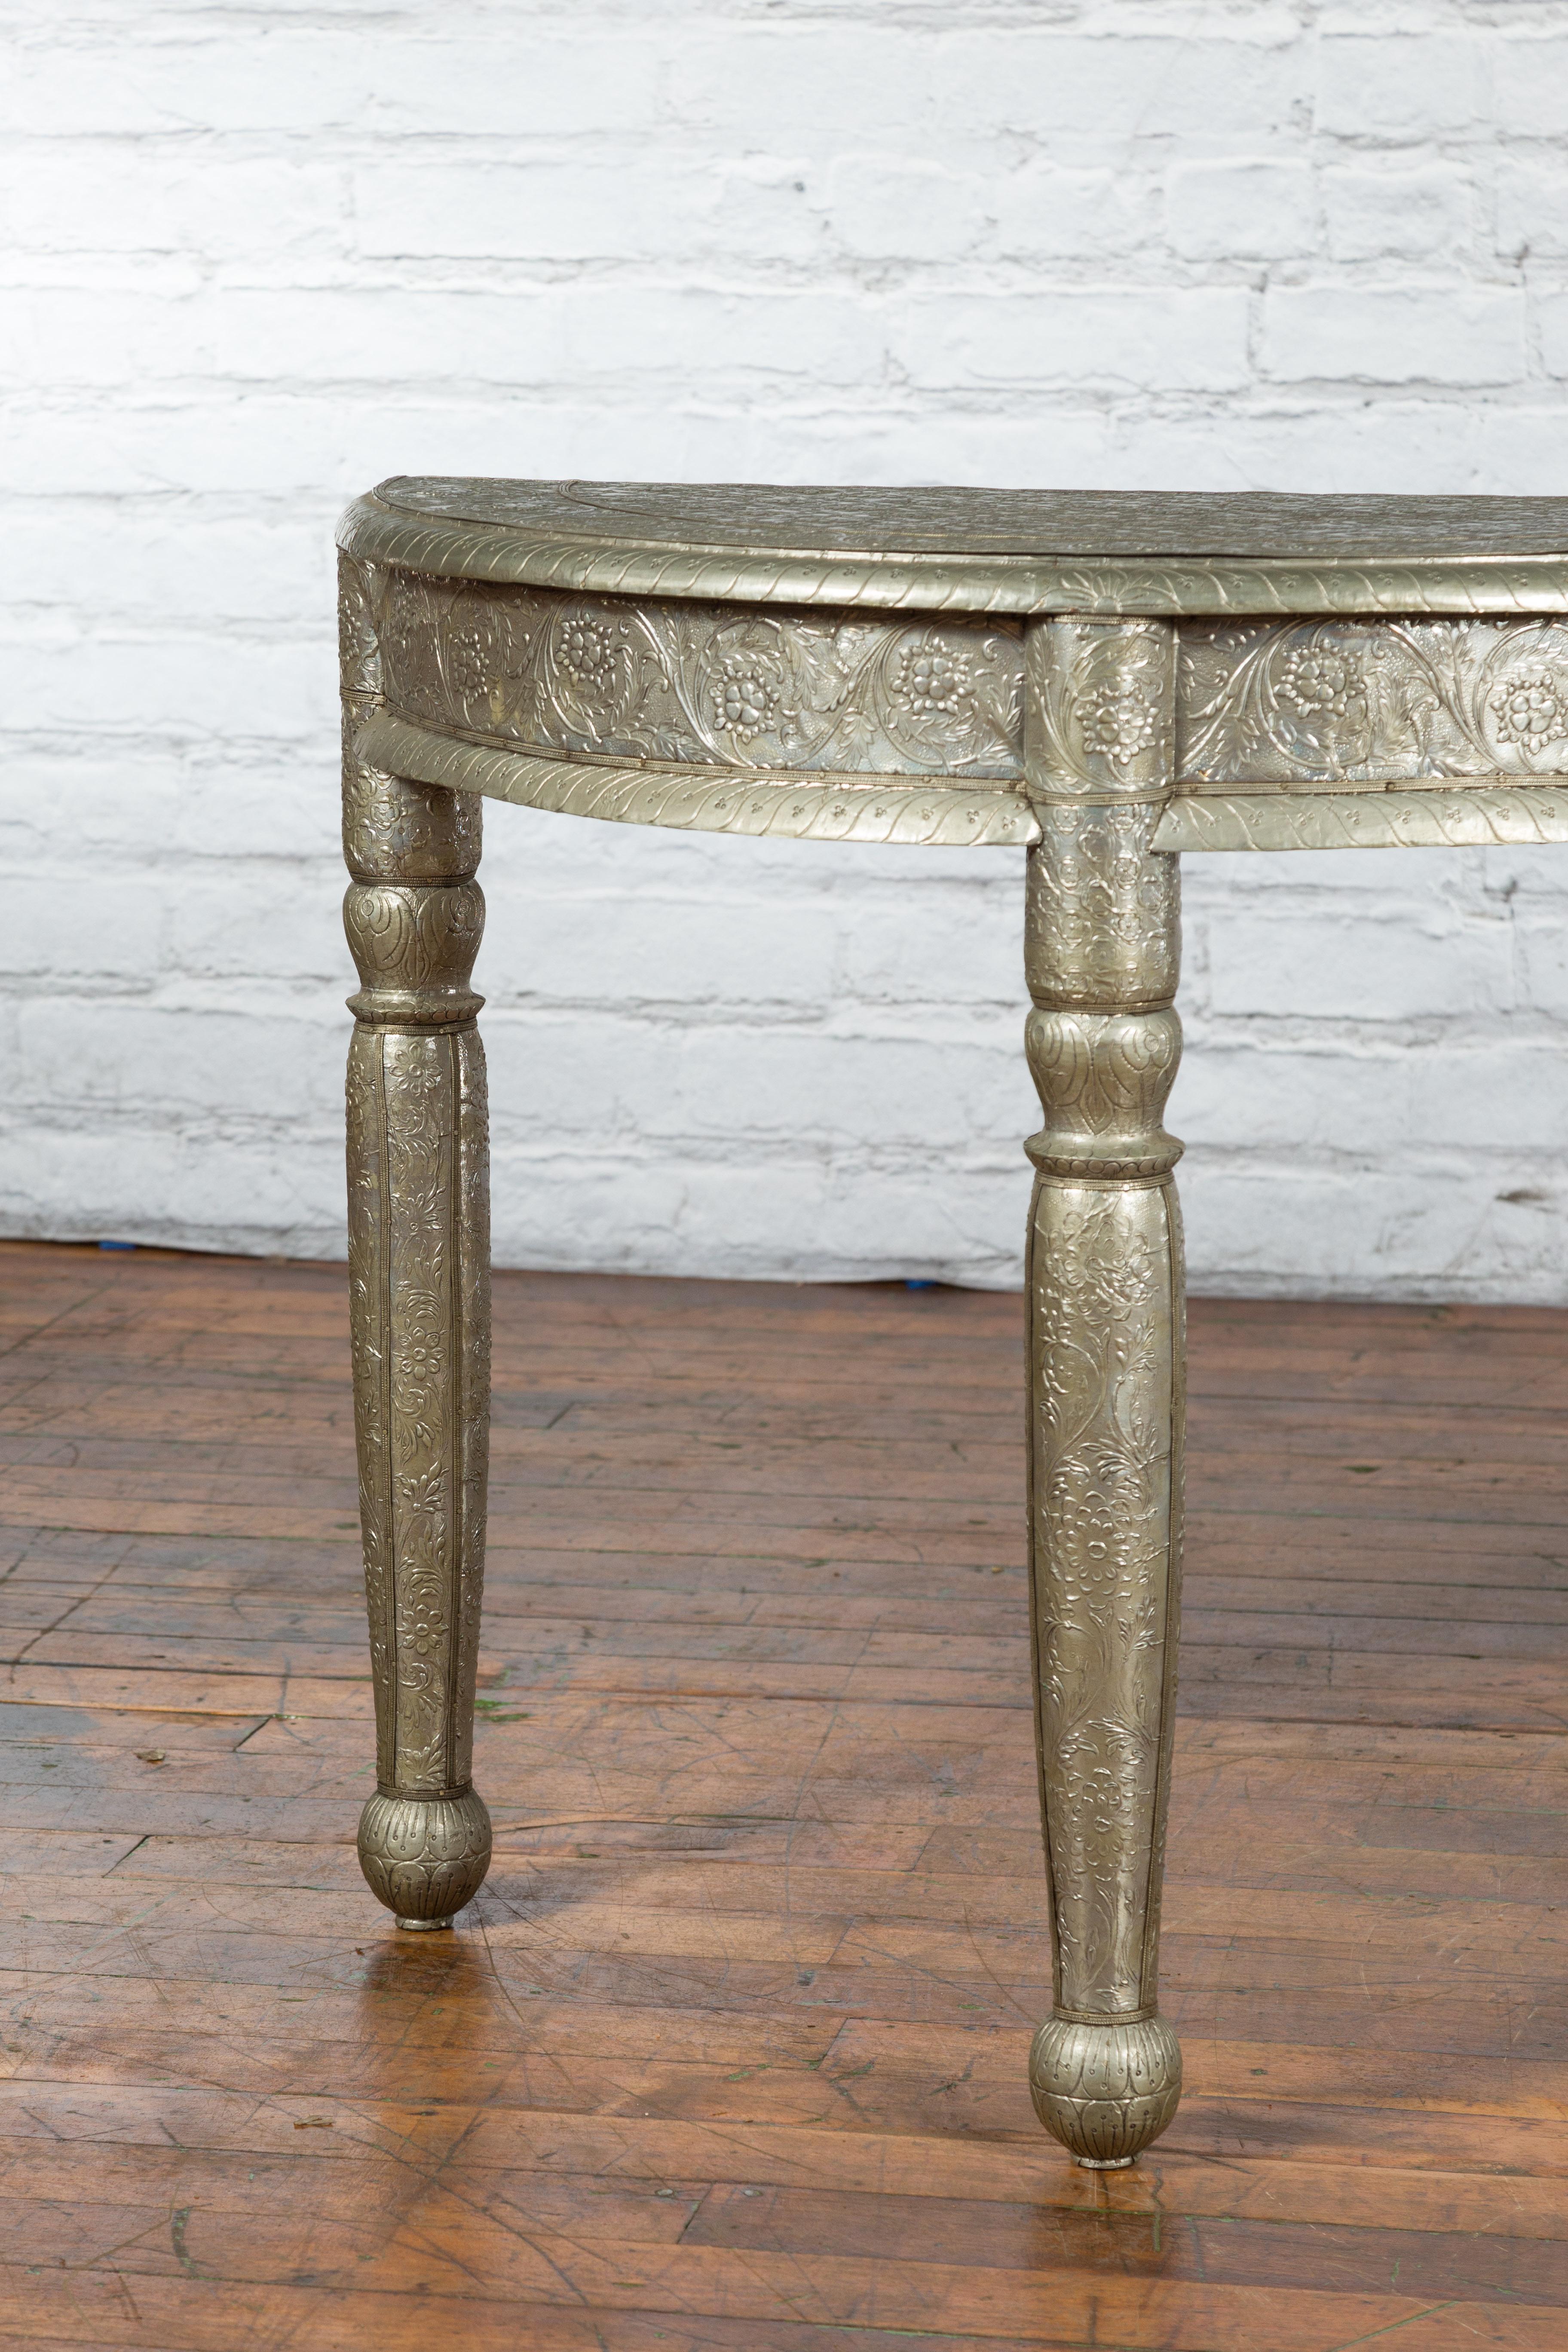 19th Century Pair of Indian Metal Sheathing Repoussé Demilune Tables with Floral Arabesques For Sale